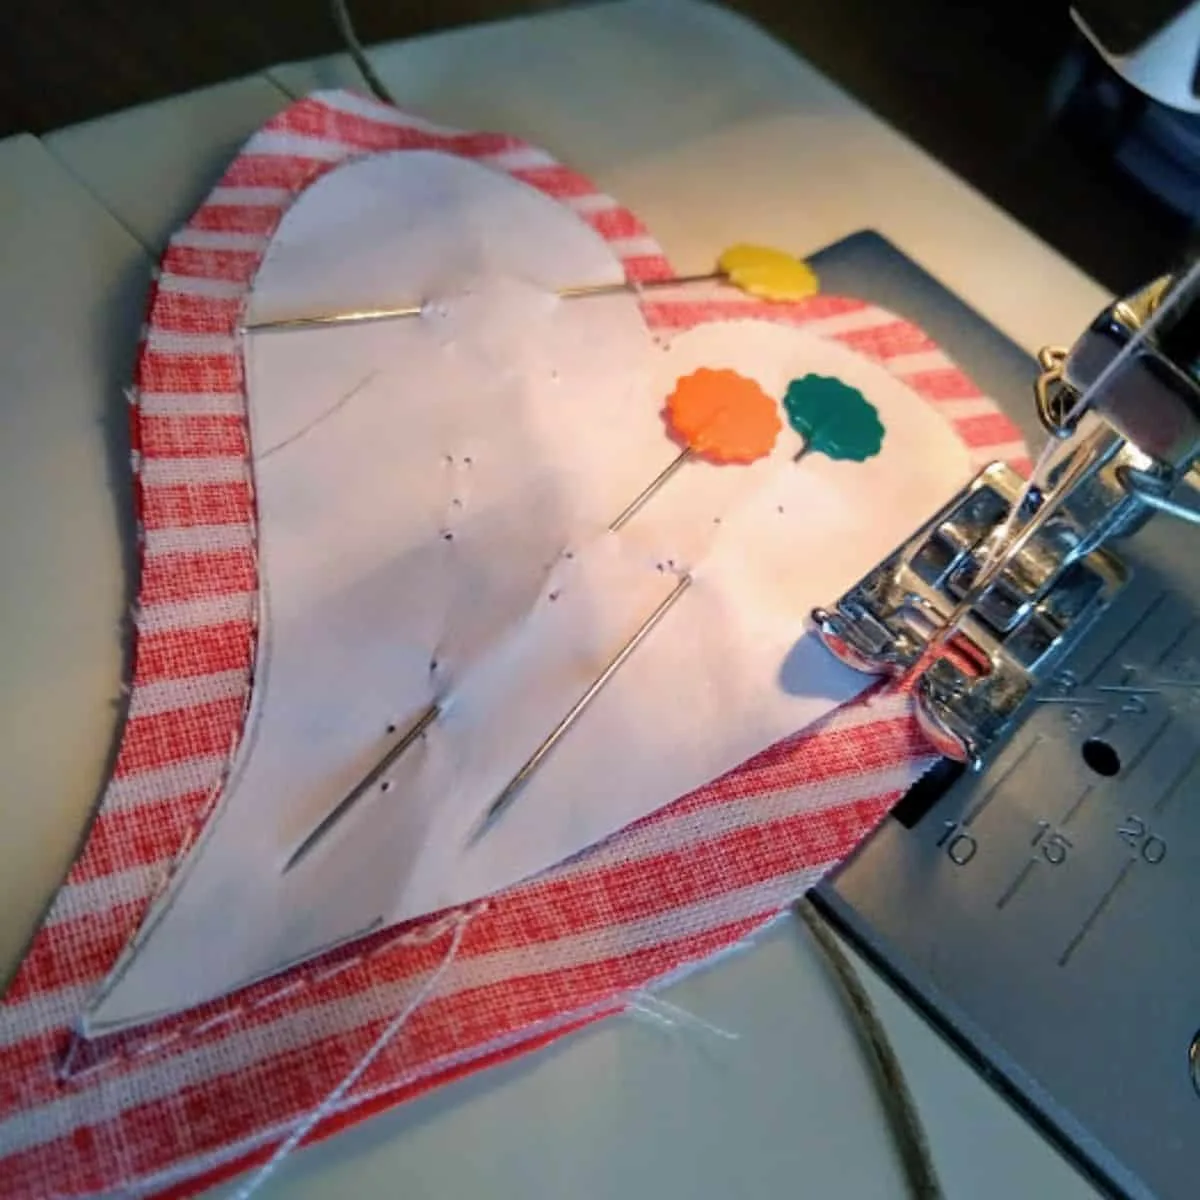 sewing around the heart